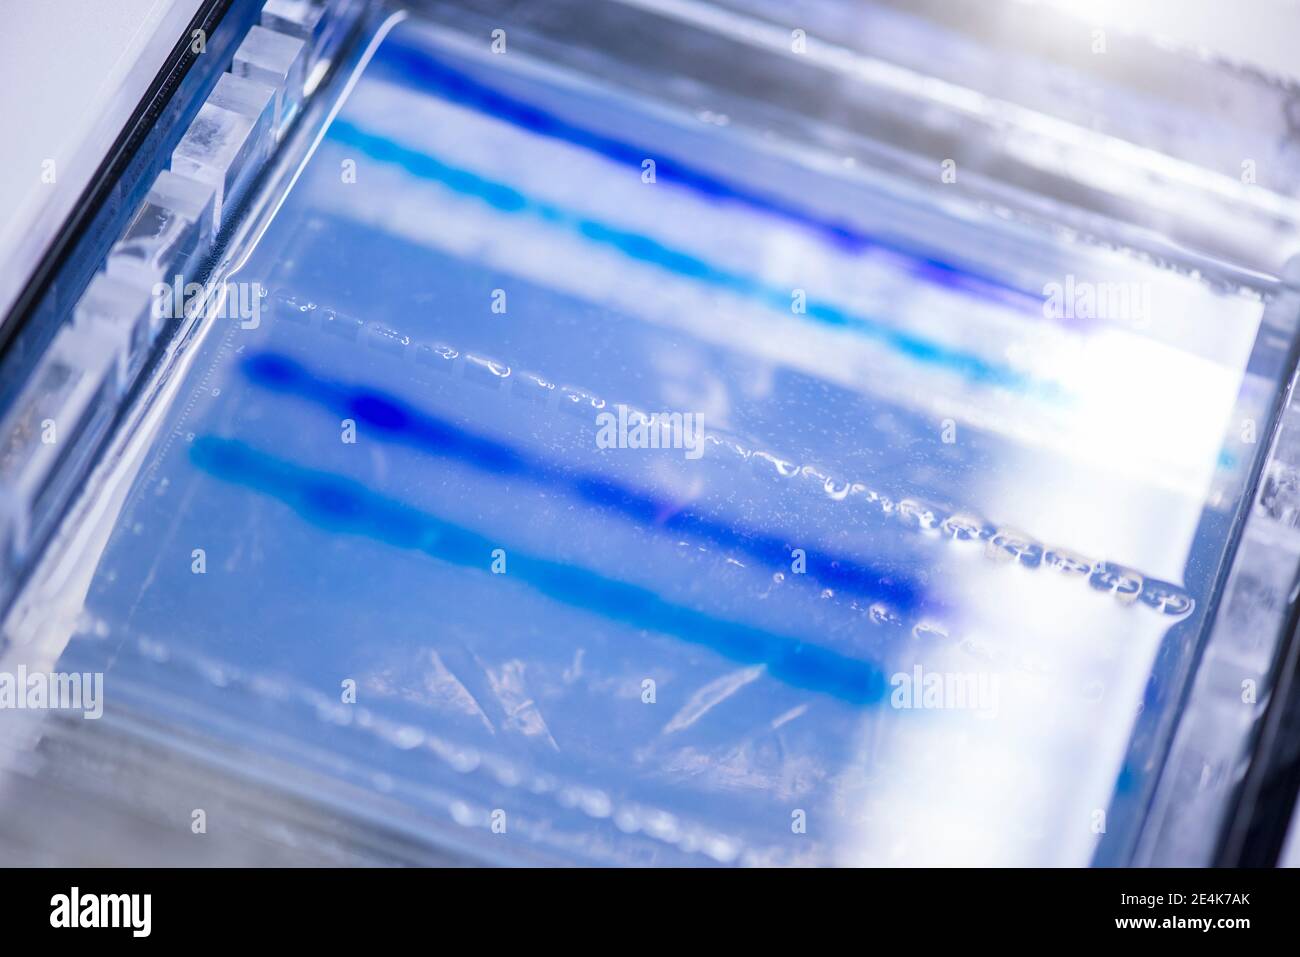 DNA sequencing gel in glass tray at laboratory Stock Photo